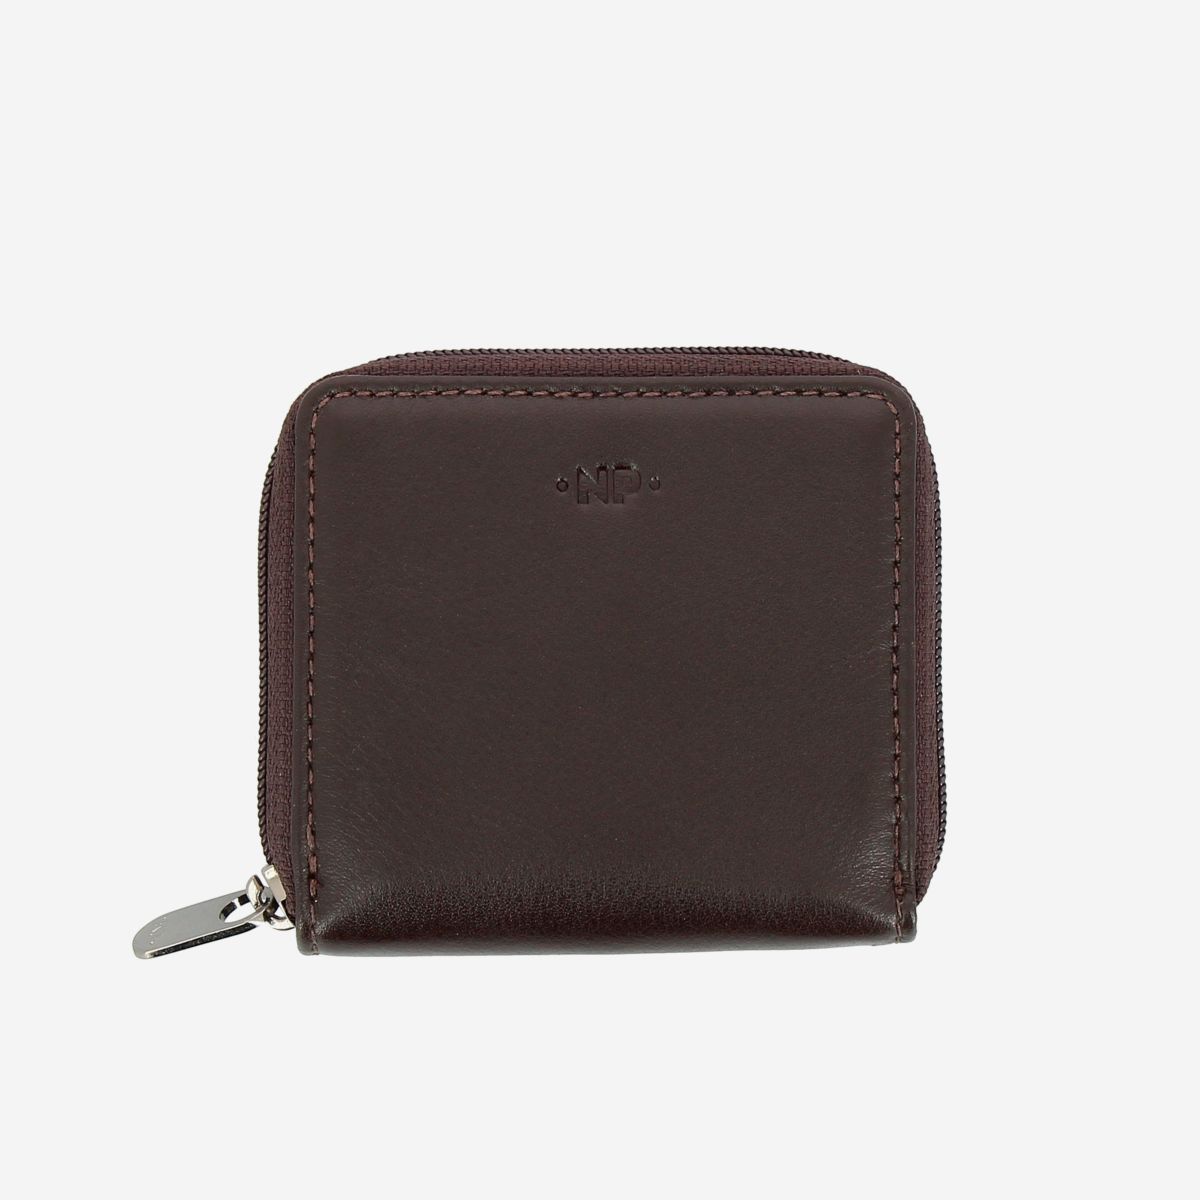 Nuvola Pelle Leather Coin Purse Dark Brown